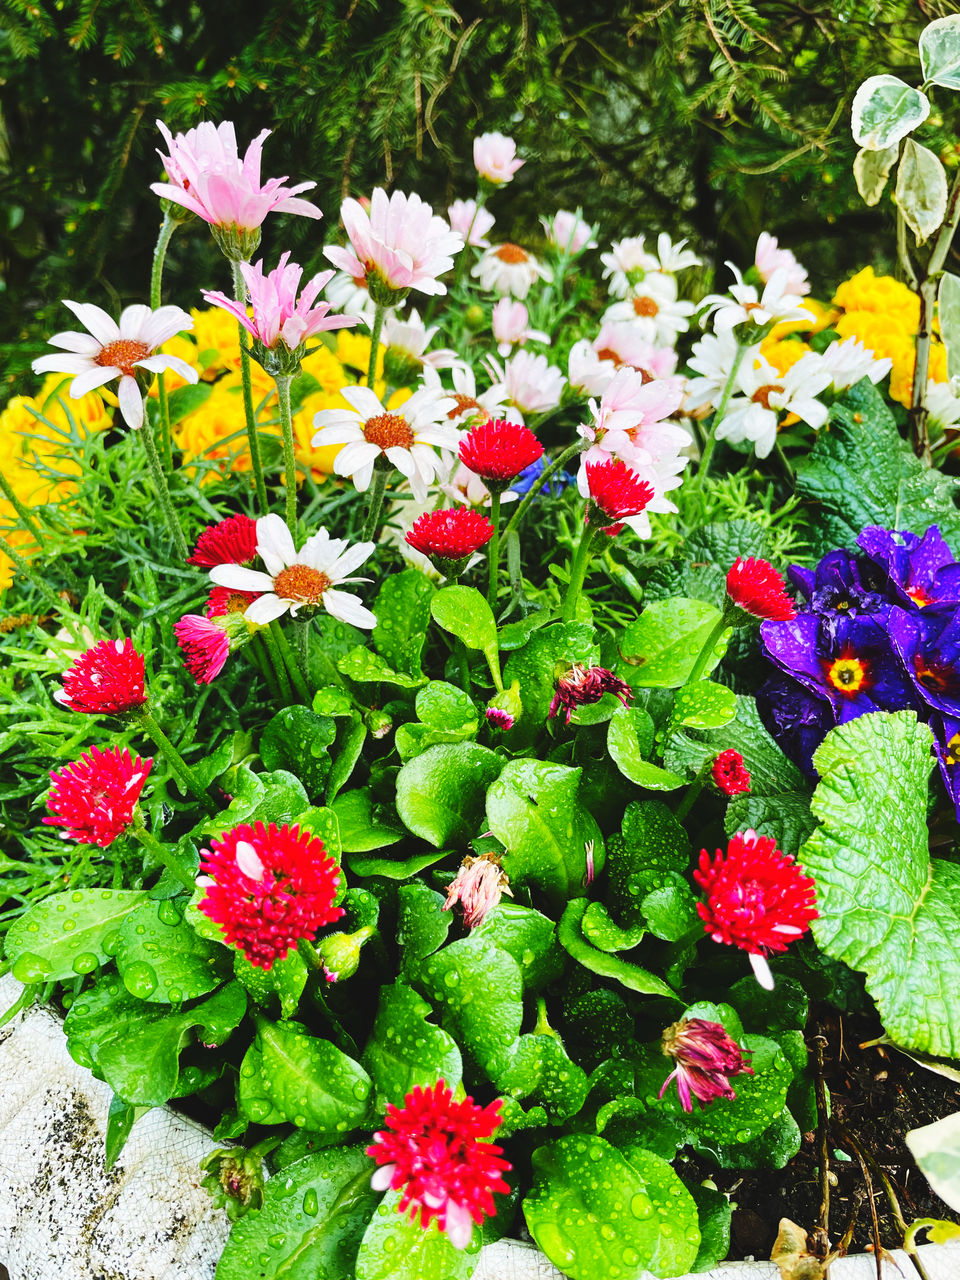 Plant Flower Flowering Plant Freshness Beauty In Nature Growth Nature Fragility No People Flower Head Day Floristry Close-up Green Garden High Angle View Multi Colored Petal Inflorescence Plant Part